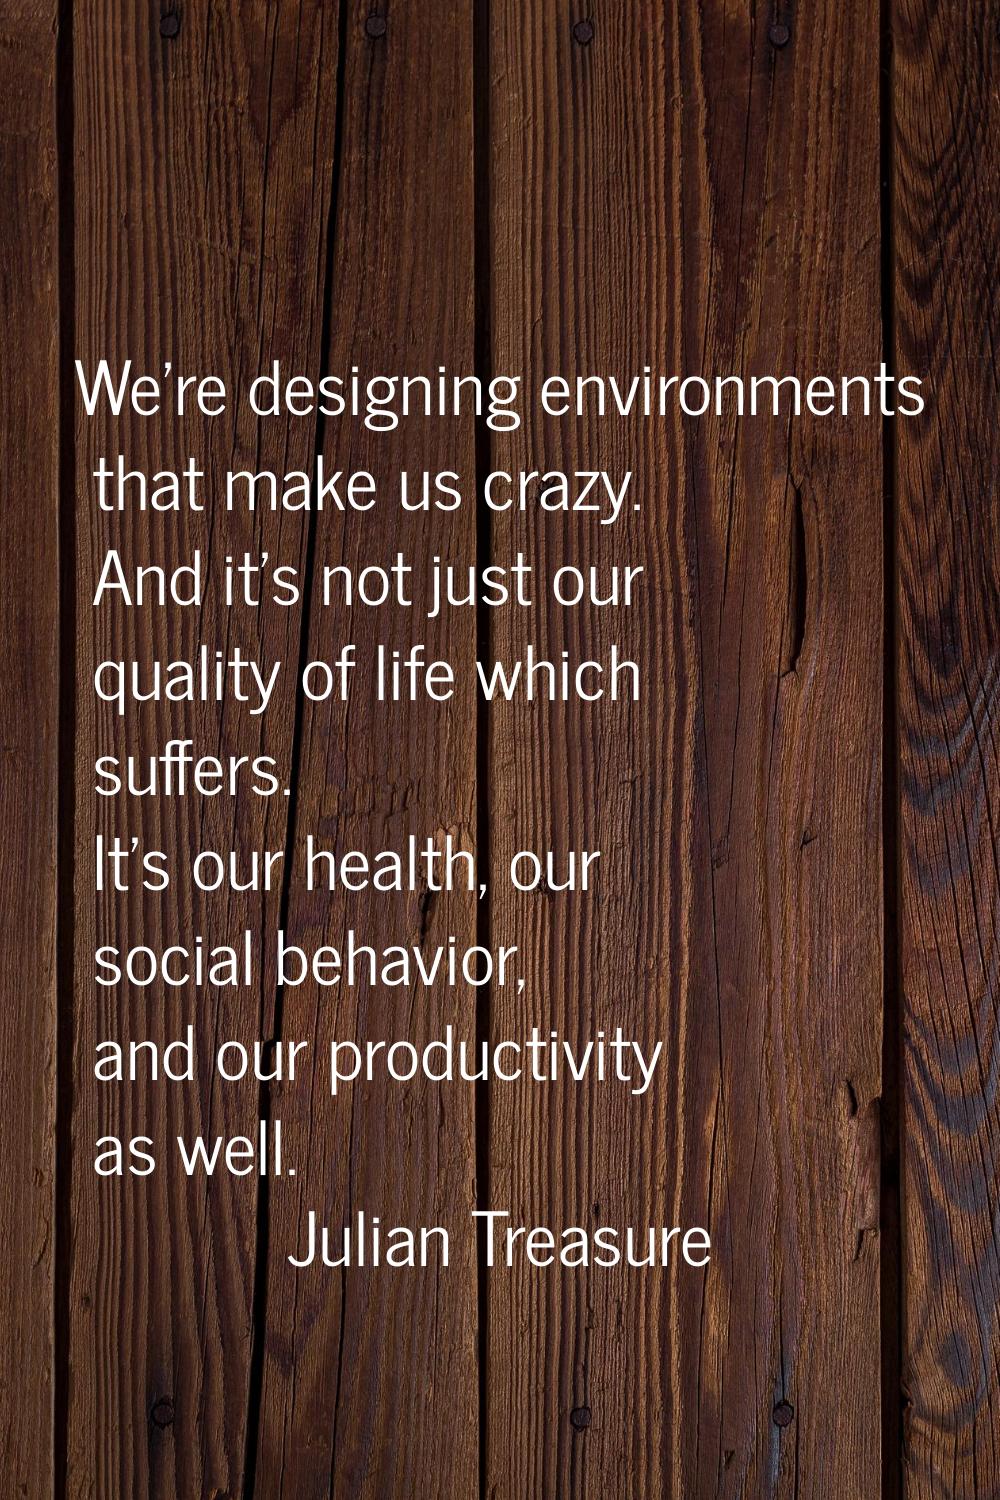 We're designing environments that make us crazy. And it's not just our quality of life which suffer